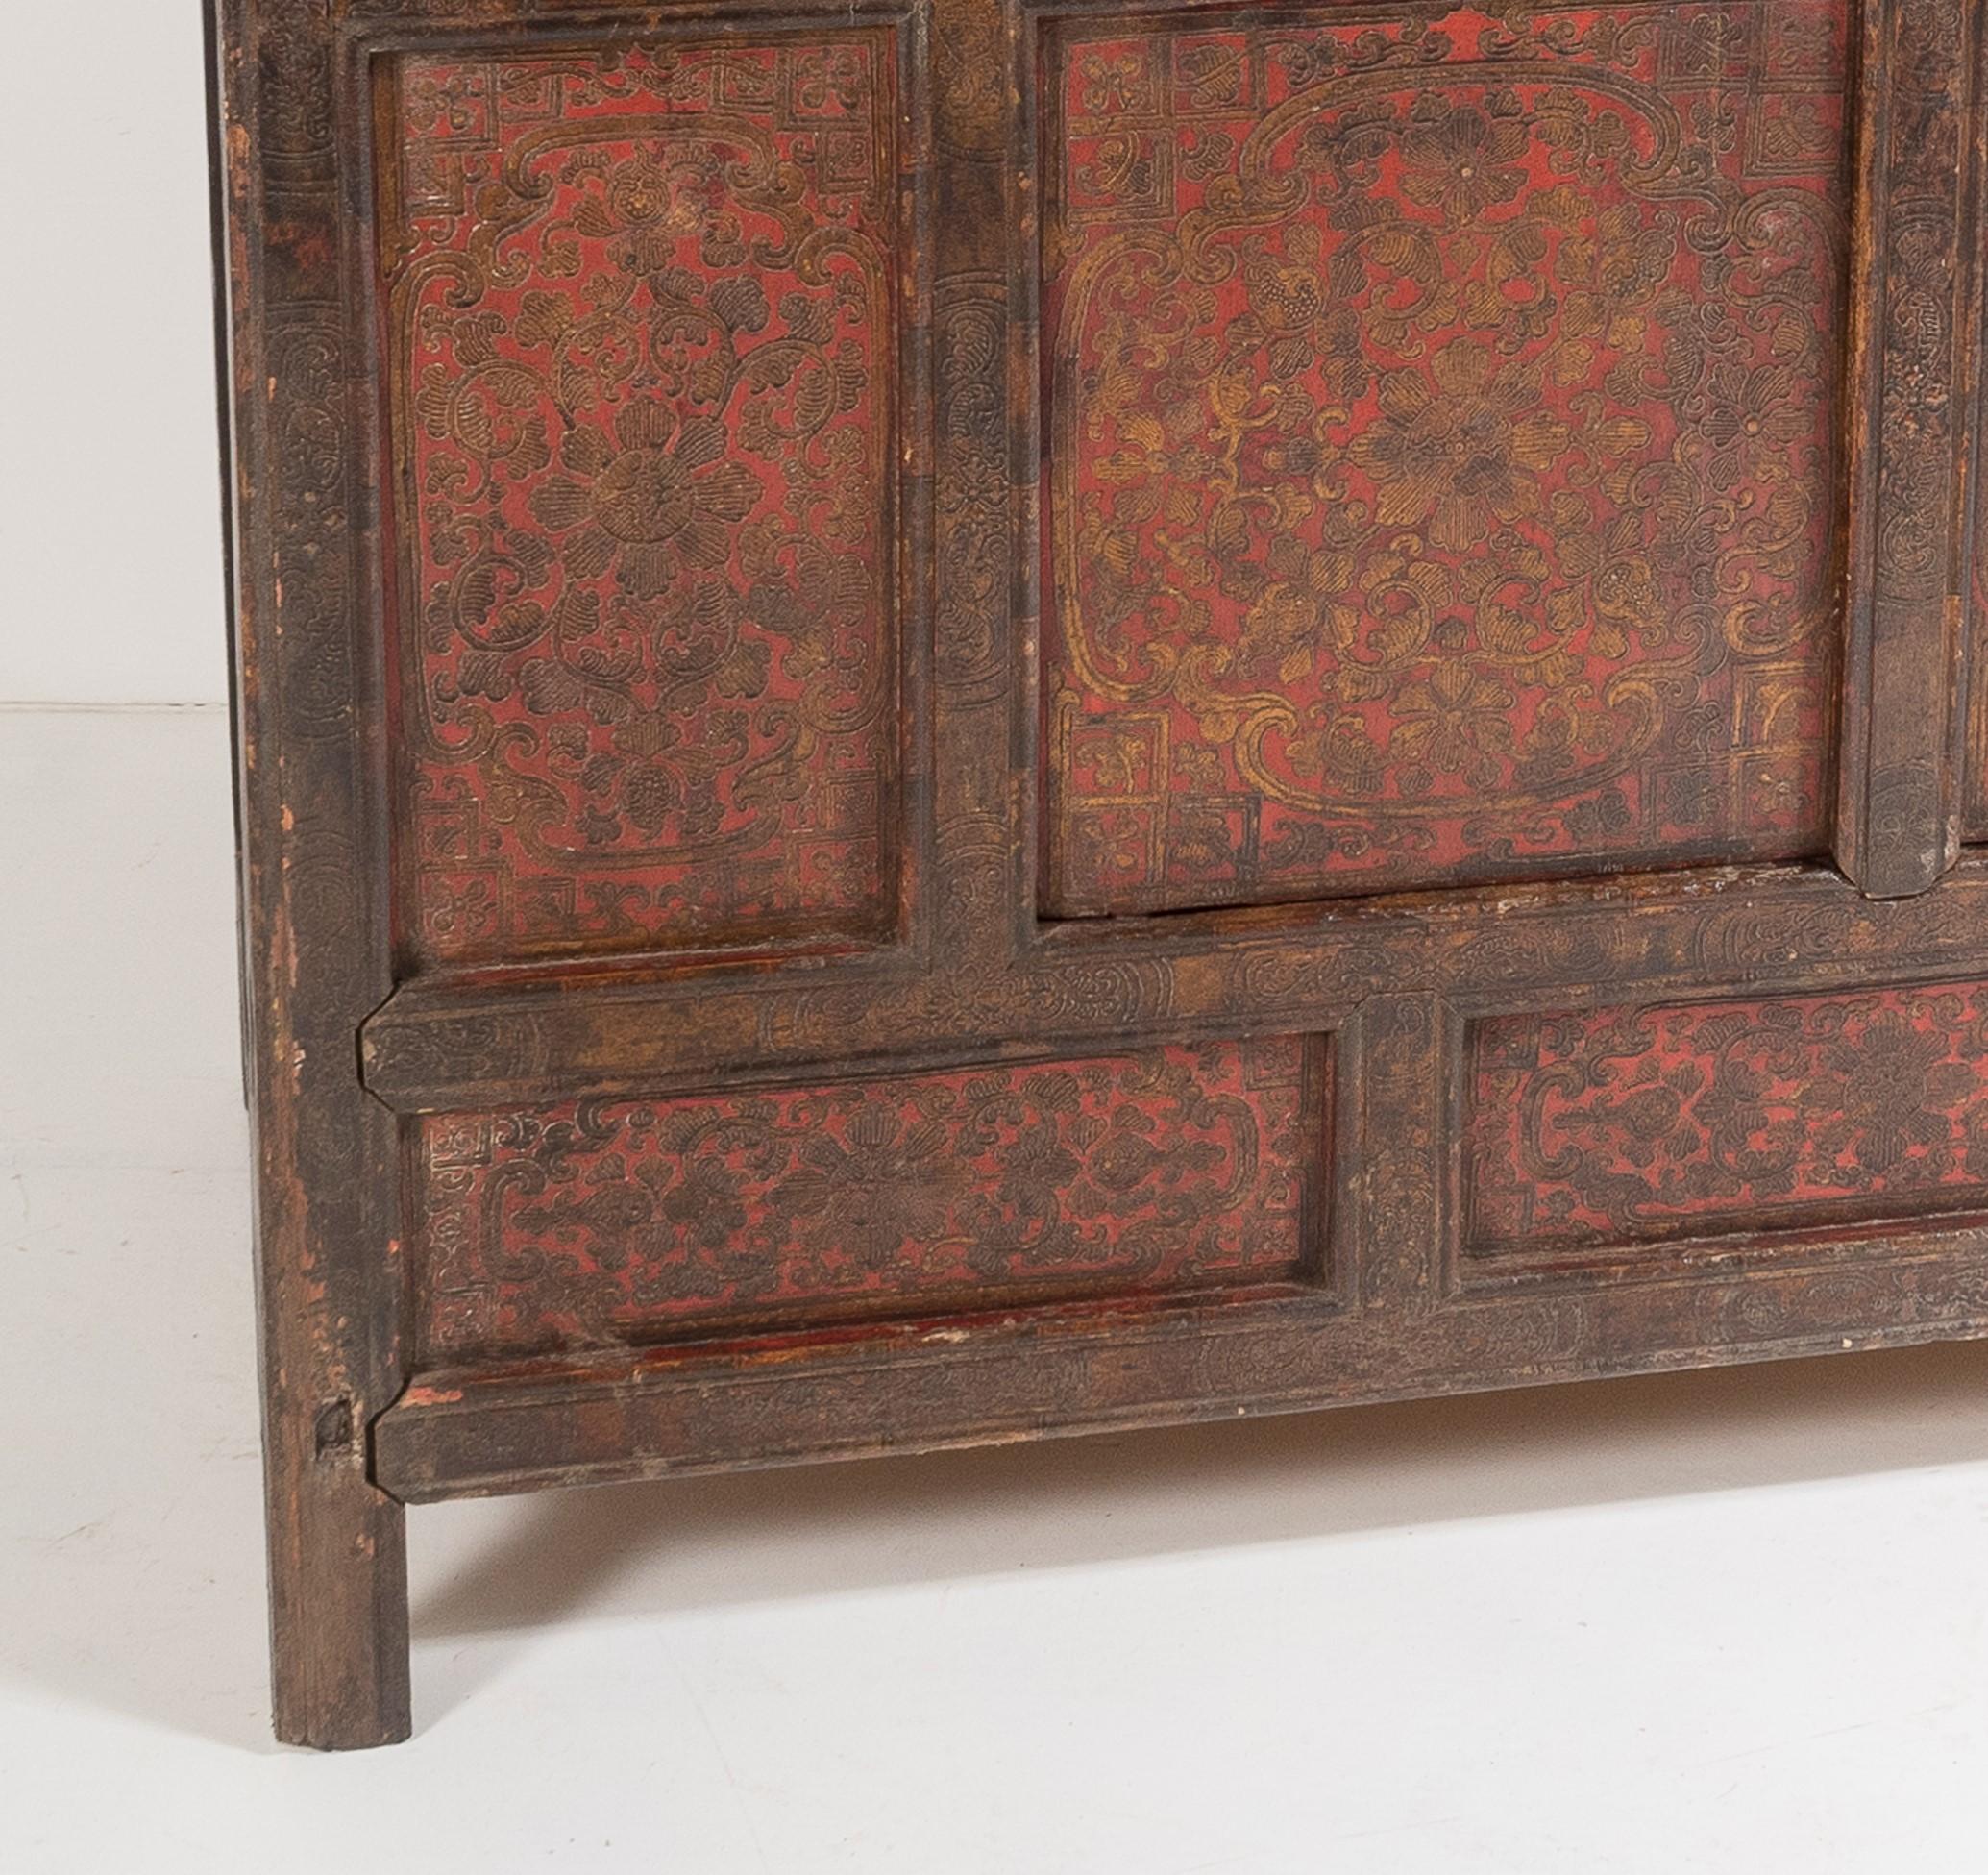 Original 19thC Large Chinese Tibetan Hand Painted Lacquered Cupboard Sideboard en vente 4